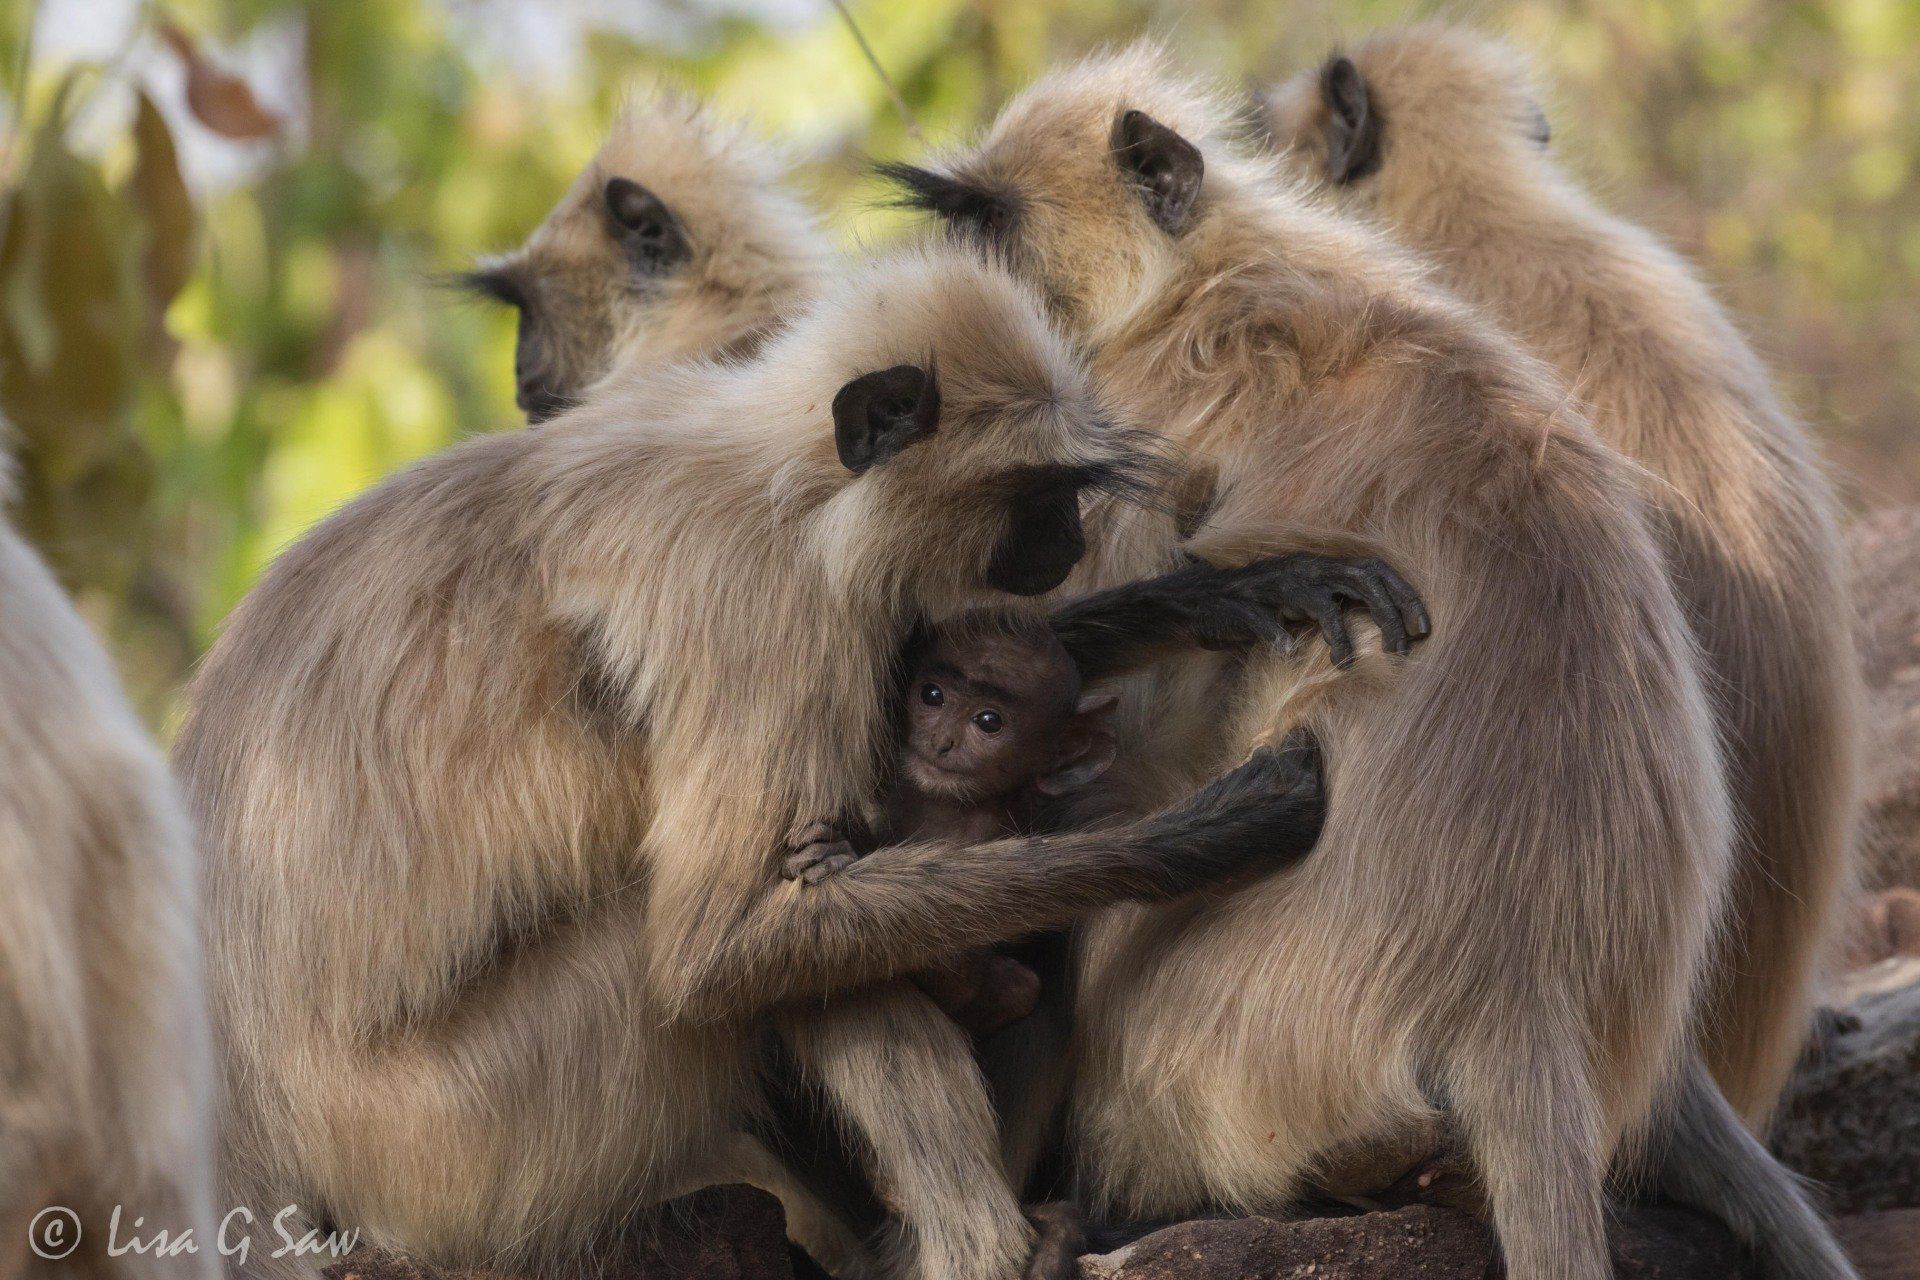 Group grooming with baby langur